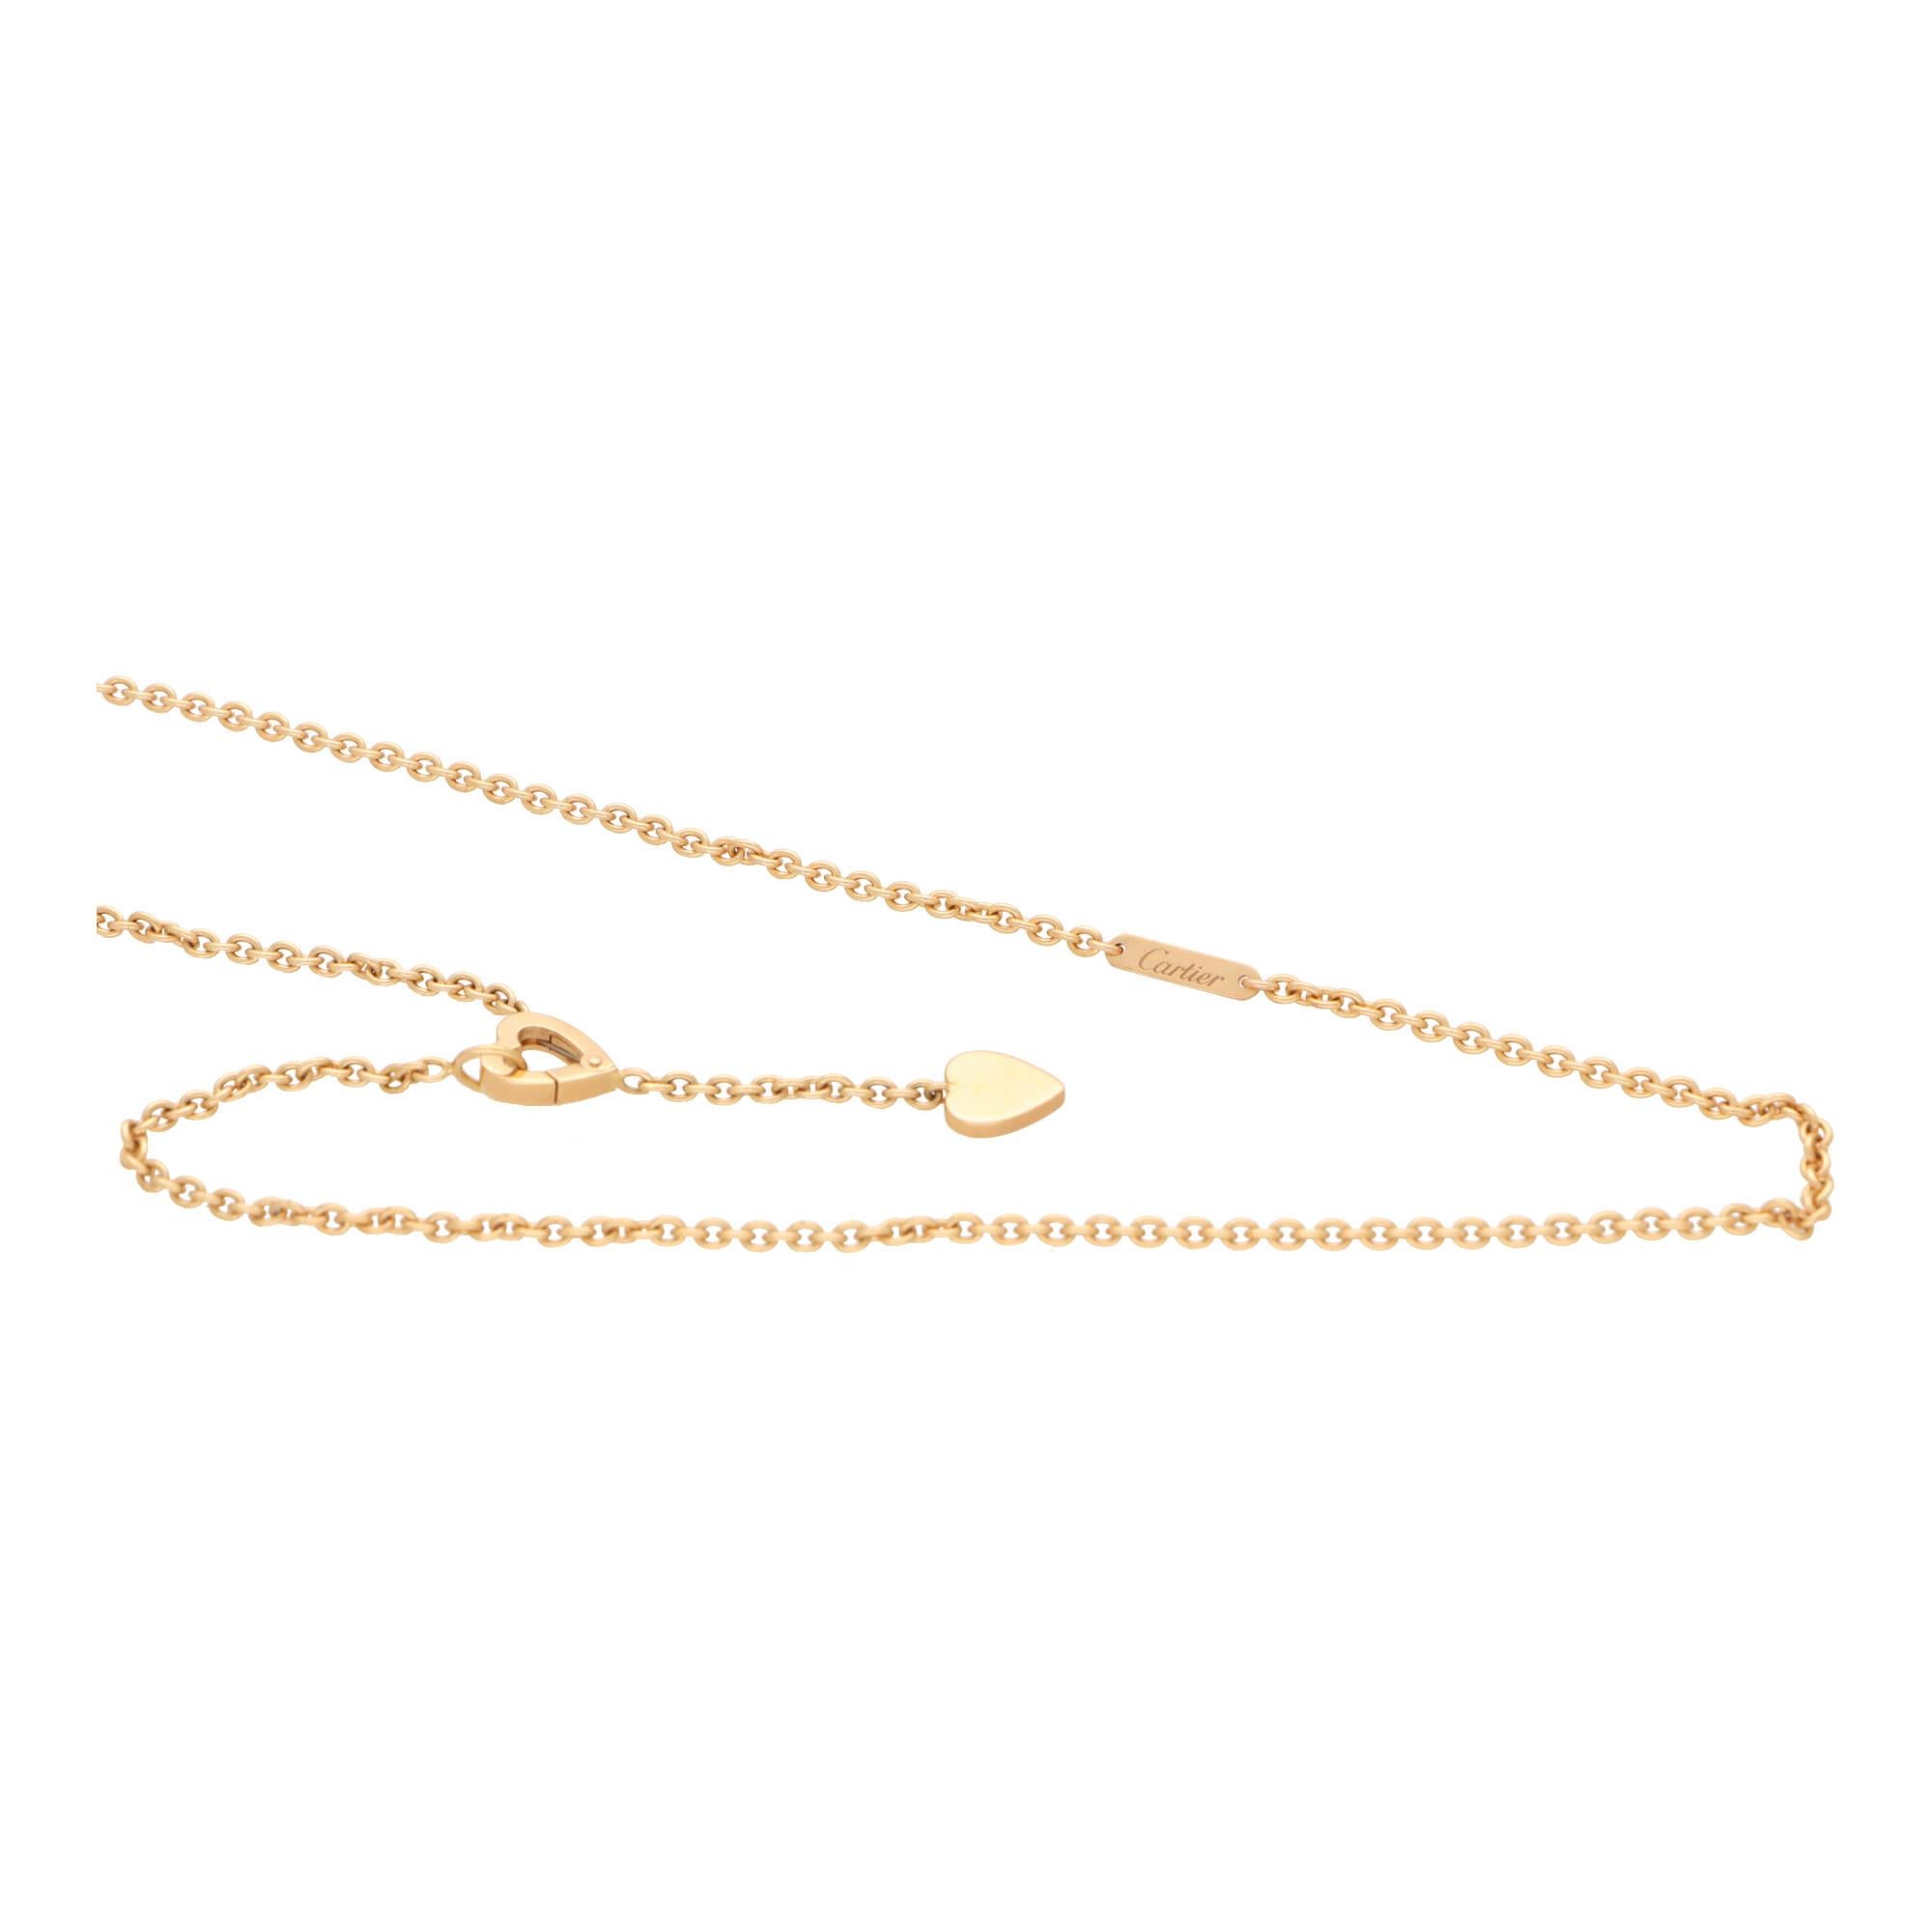 A stylish vintage Cartier ‘Mon Amour’ necklace set in 18k rose gold.

From the now discontinued Mon Amour collection, the piece is designed in a lariat style, set predominately to the centre with the recognisable Mon Amour heart clasp and drop. Once